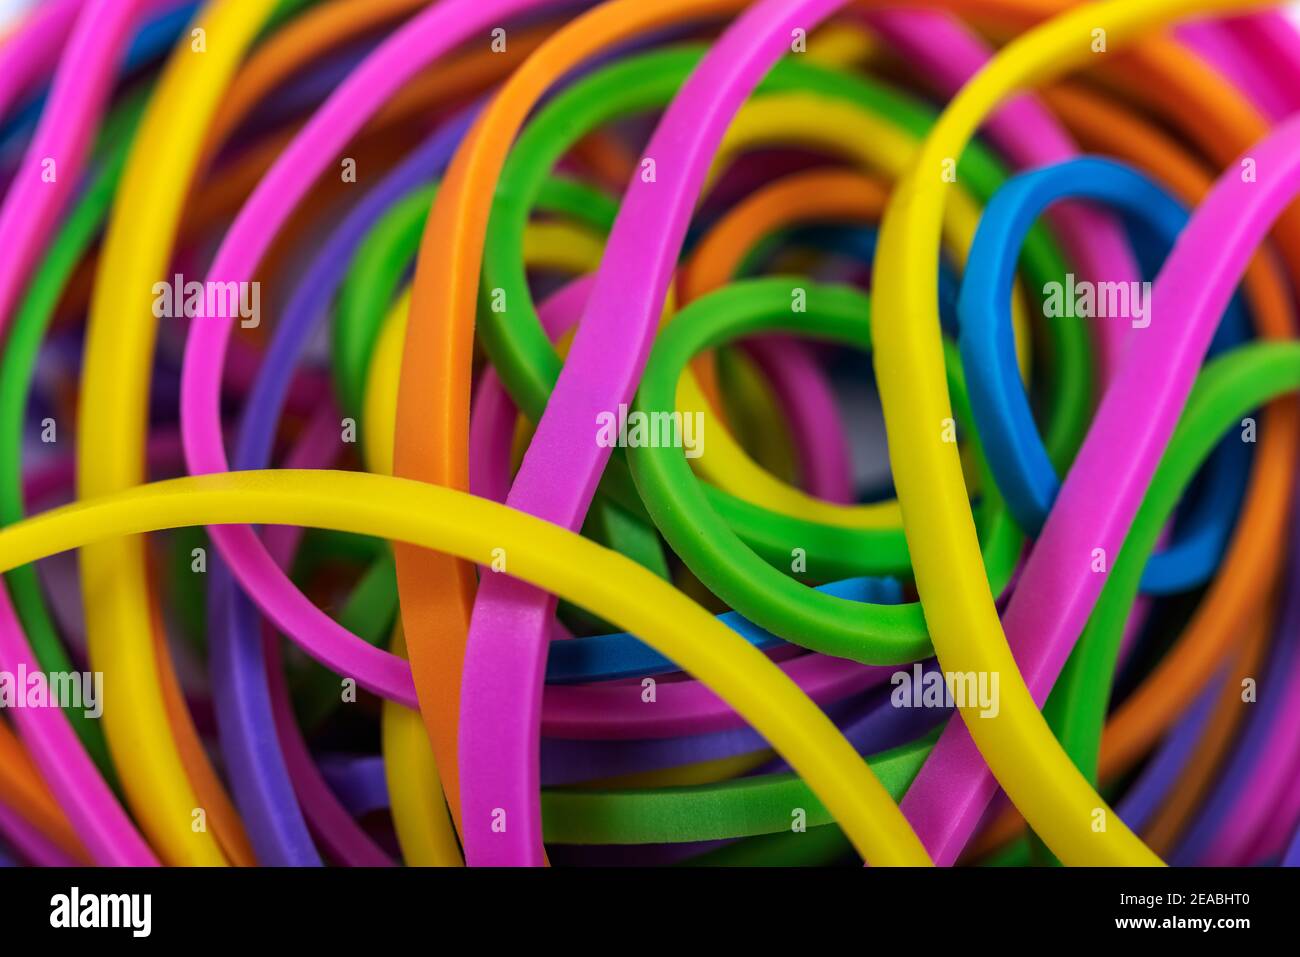 Rubber rings of different sizes and colors, detail Stock Photo